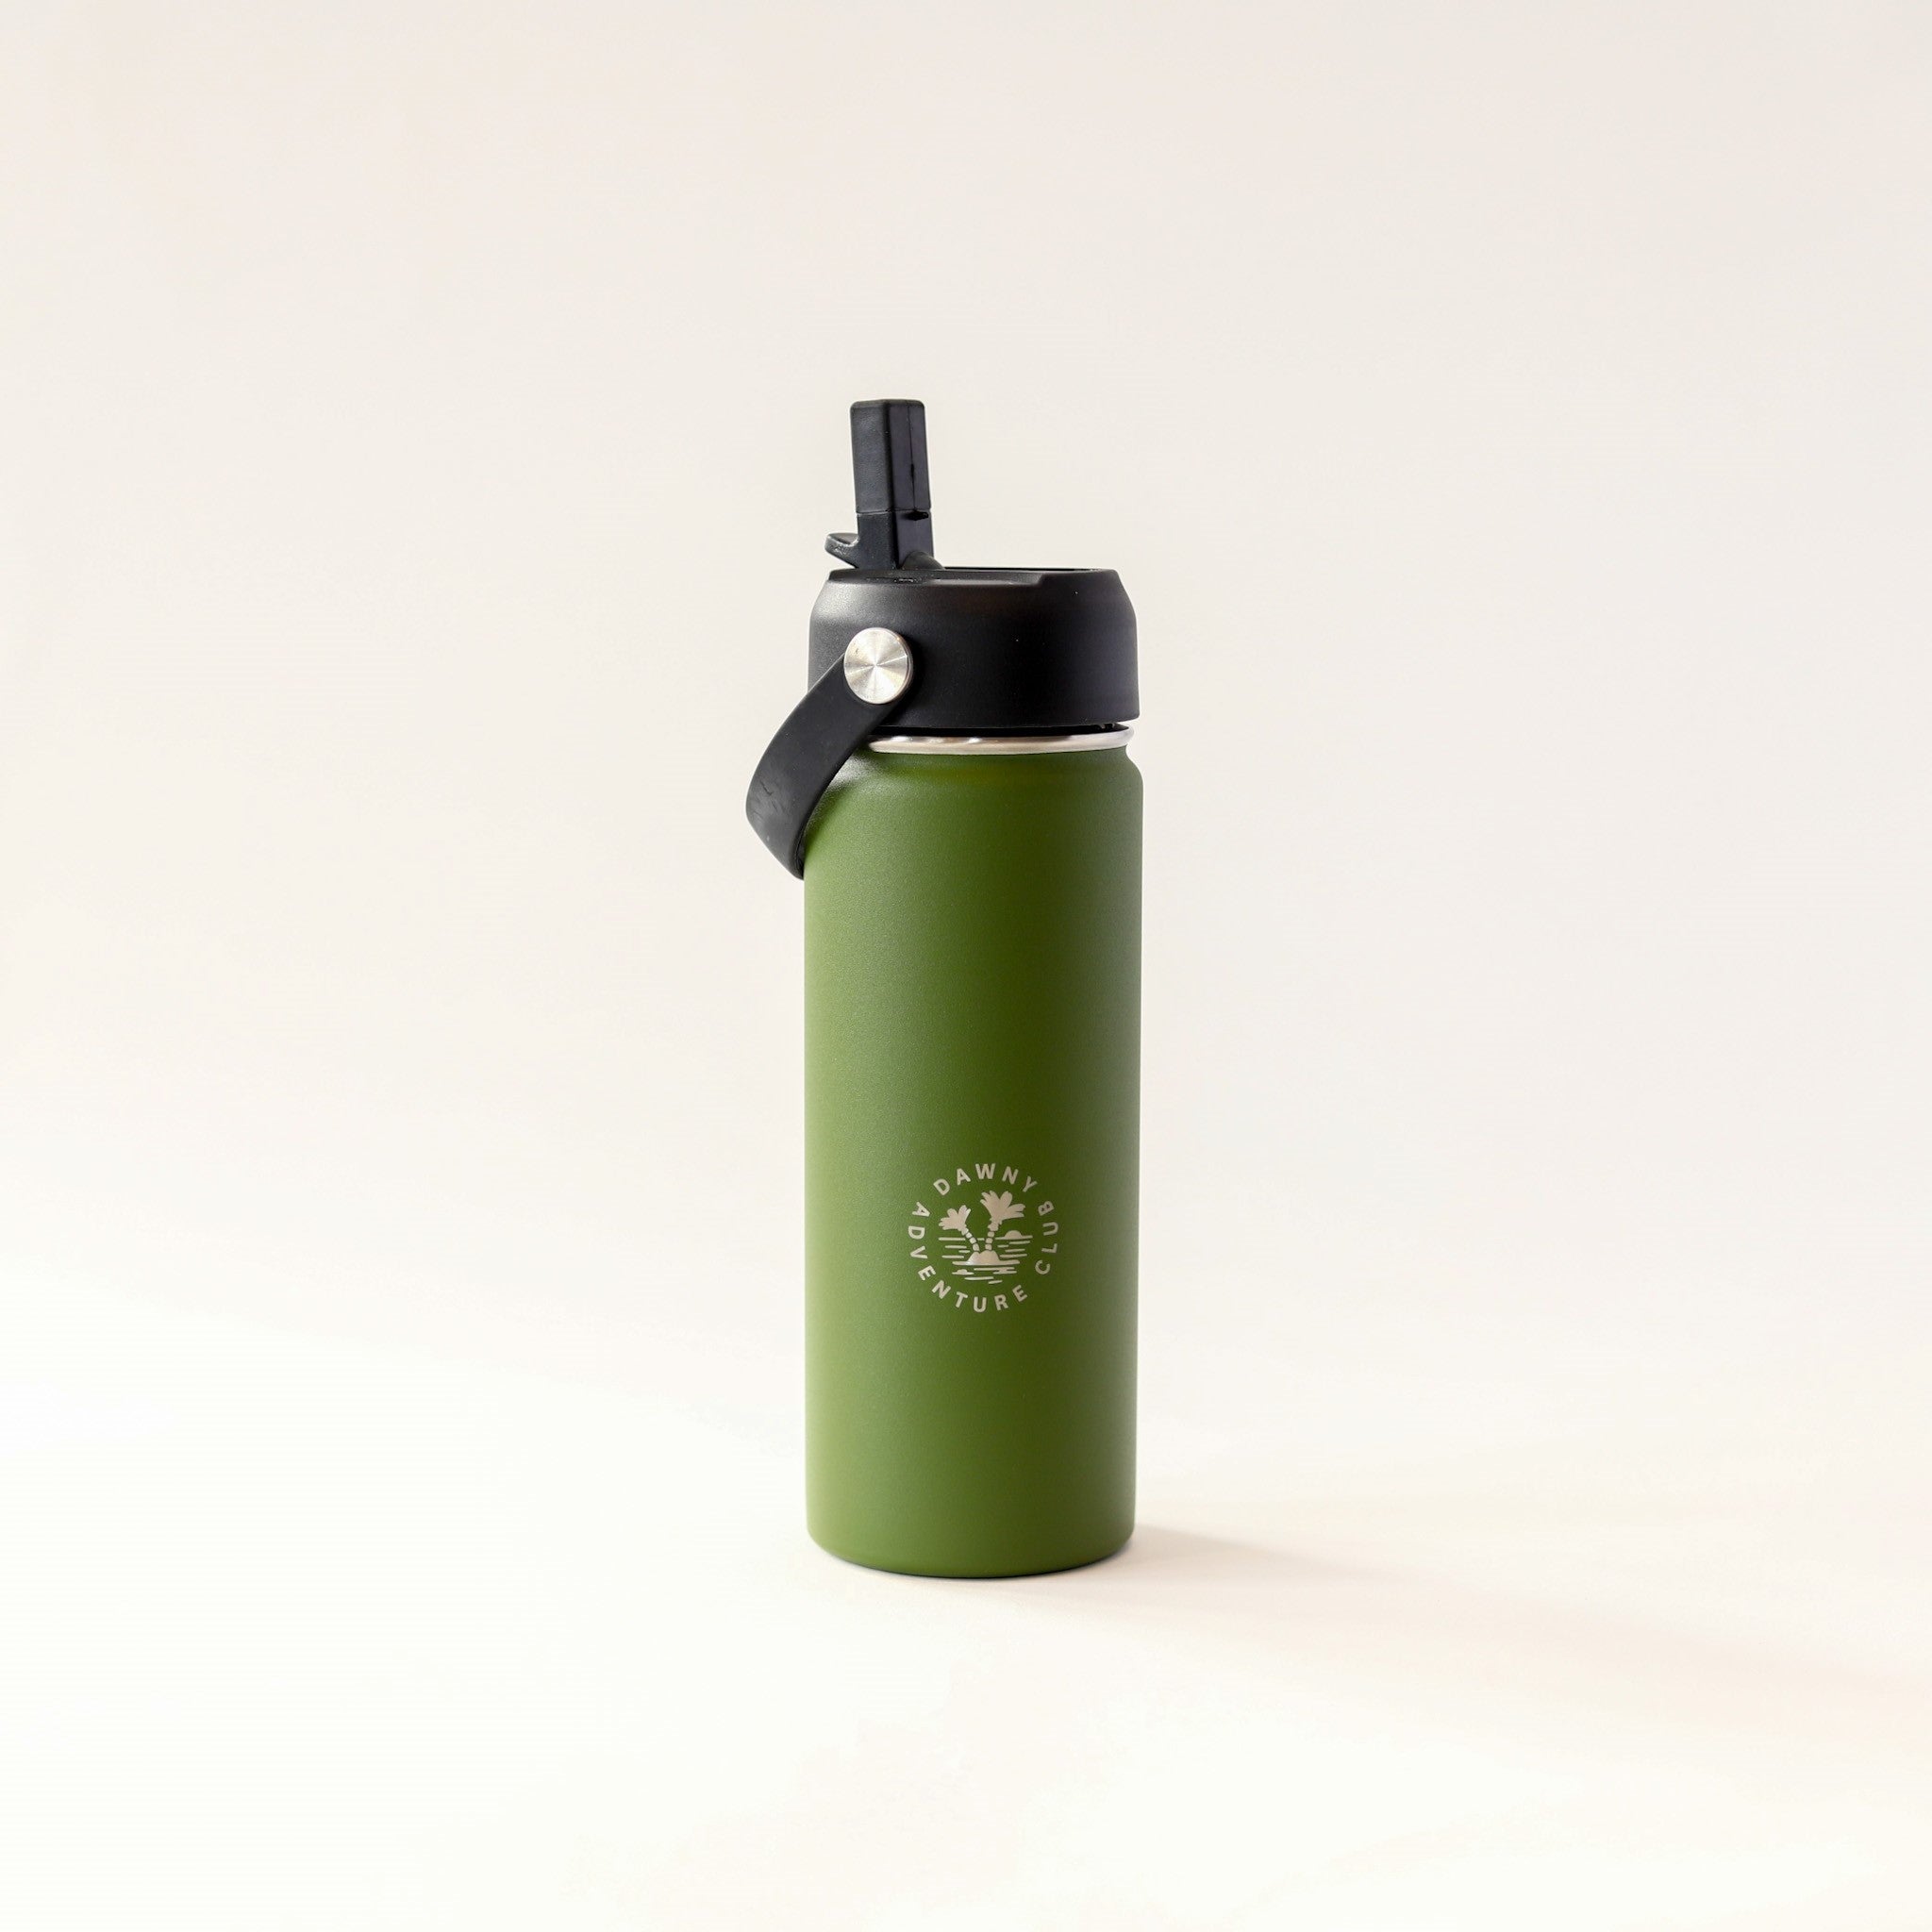 Dawny Insulated Cooler Bottle - 530ml